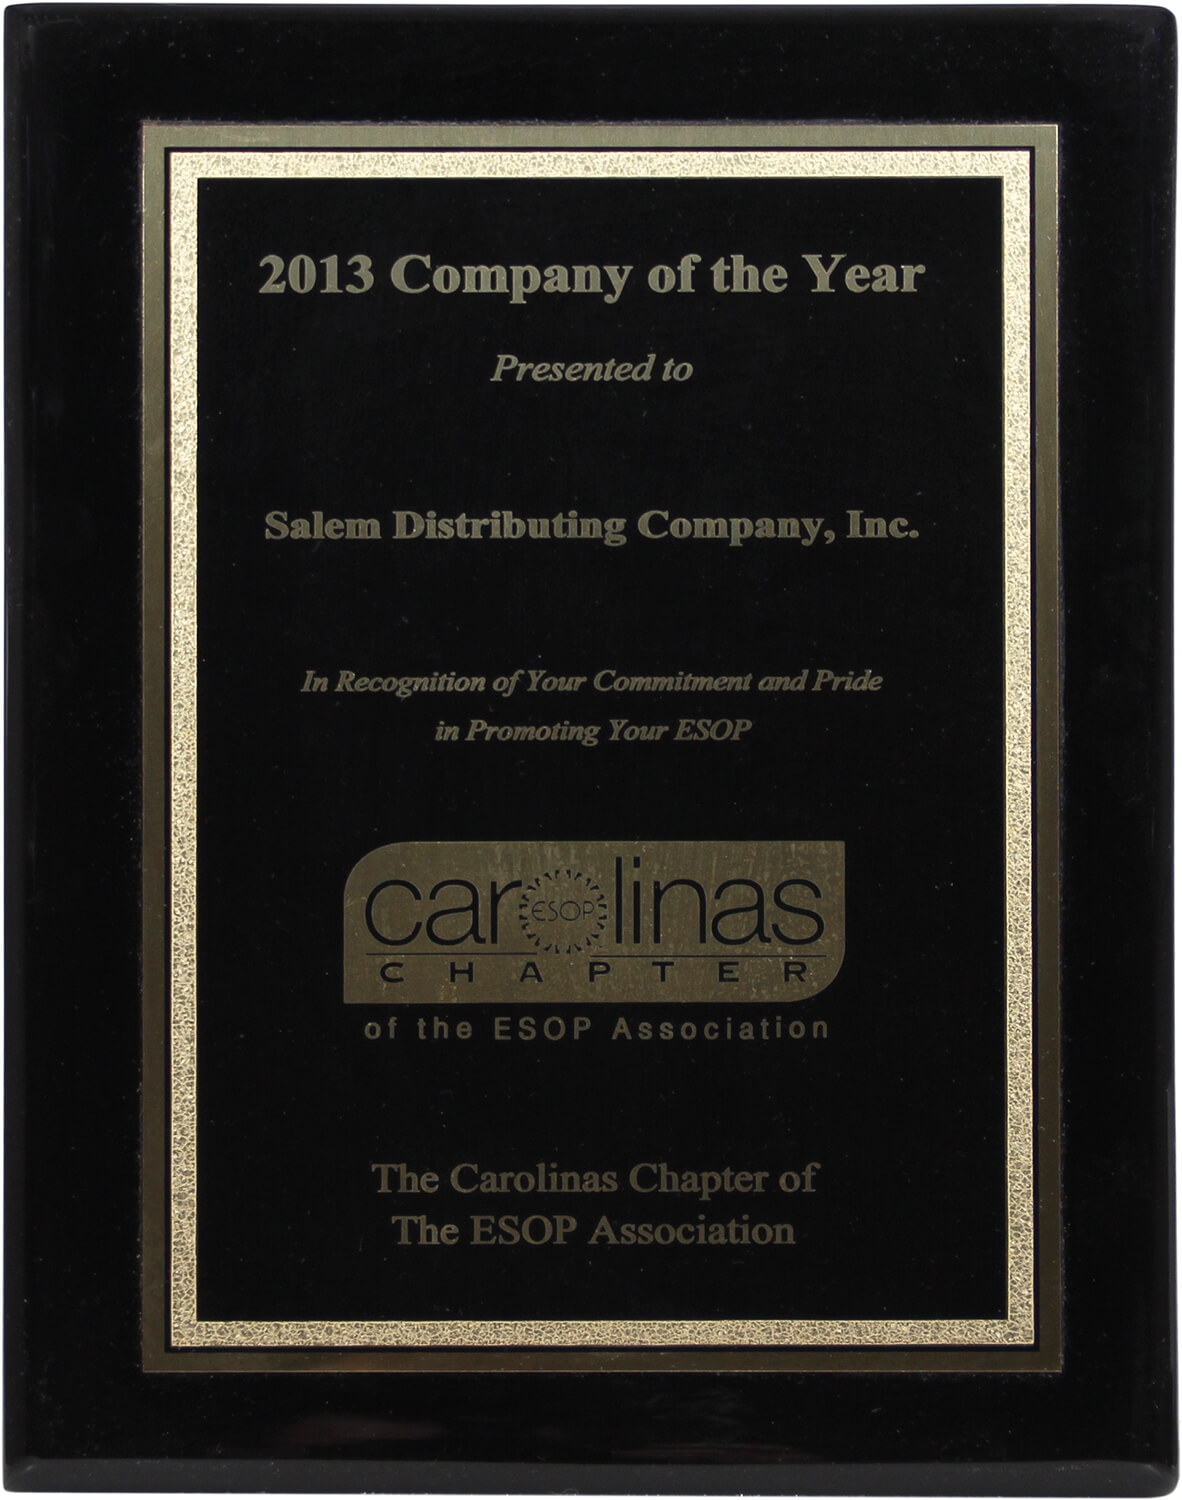 2013 Company of the year